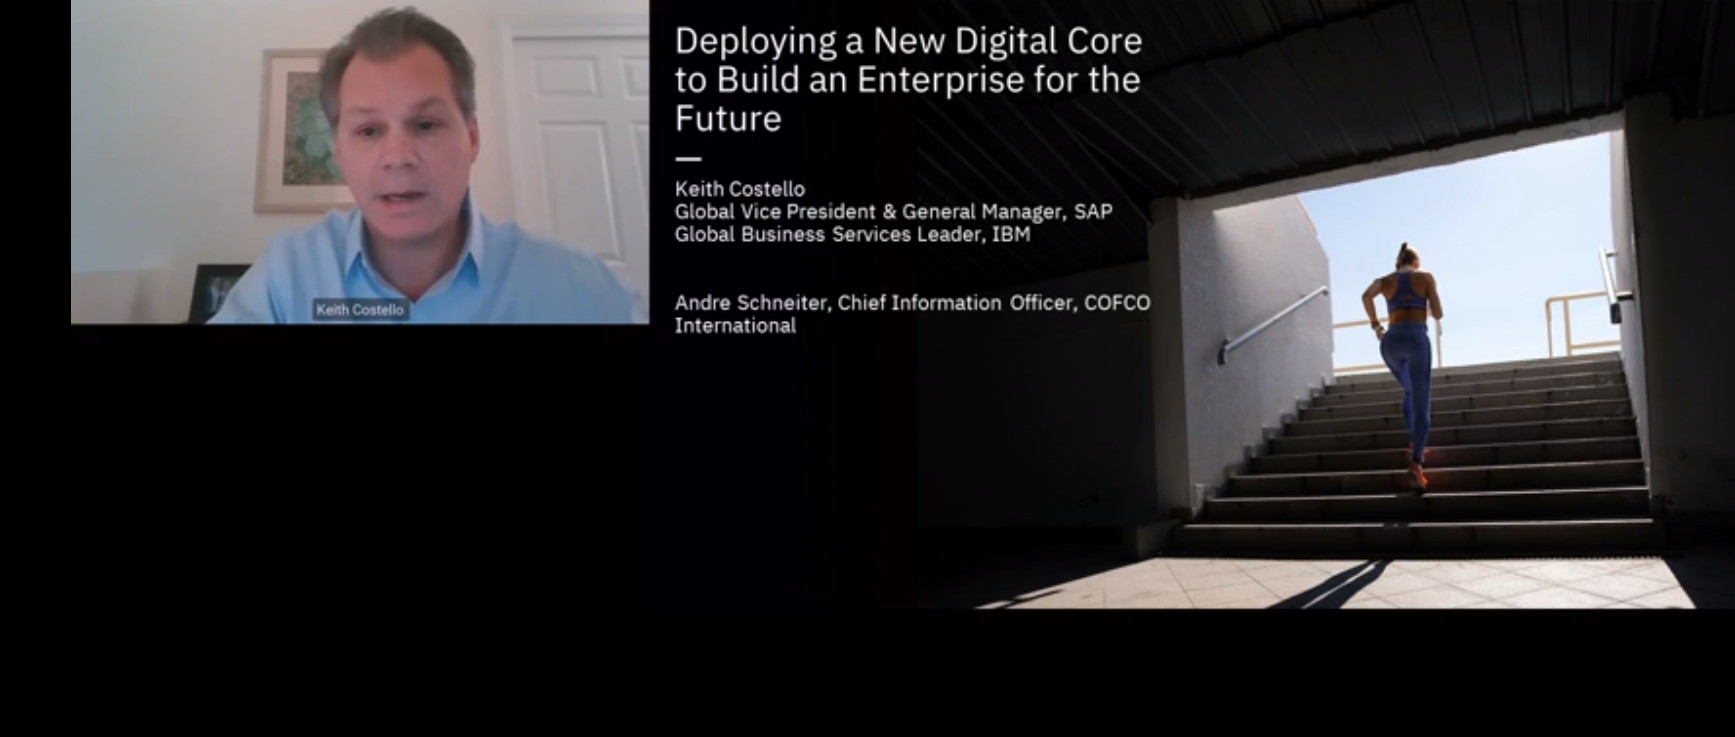 Deploying a New Digital Core to Build an Enterprise for the Future